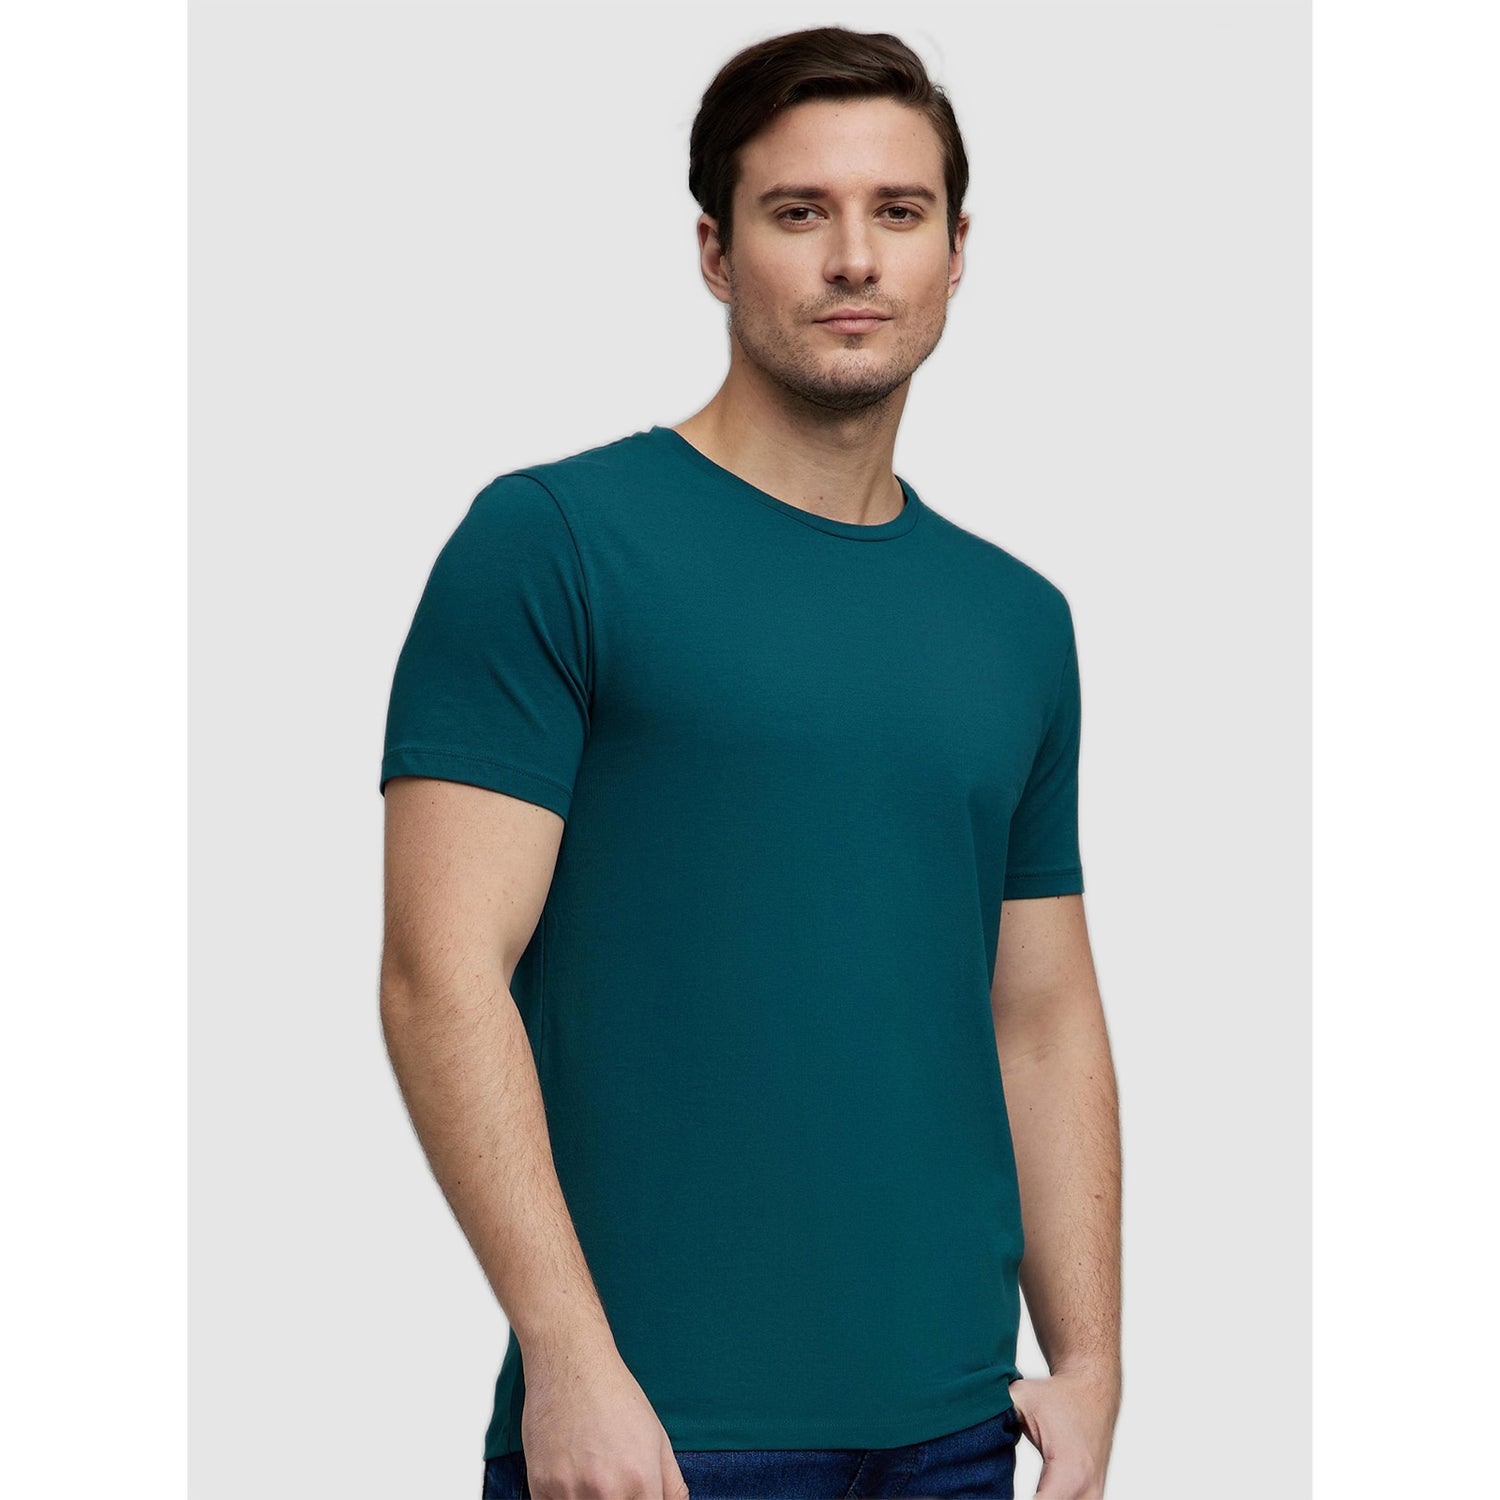 Men's Teal Solid T-Shirts (Various Sizes)